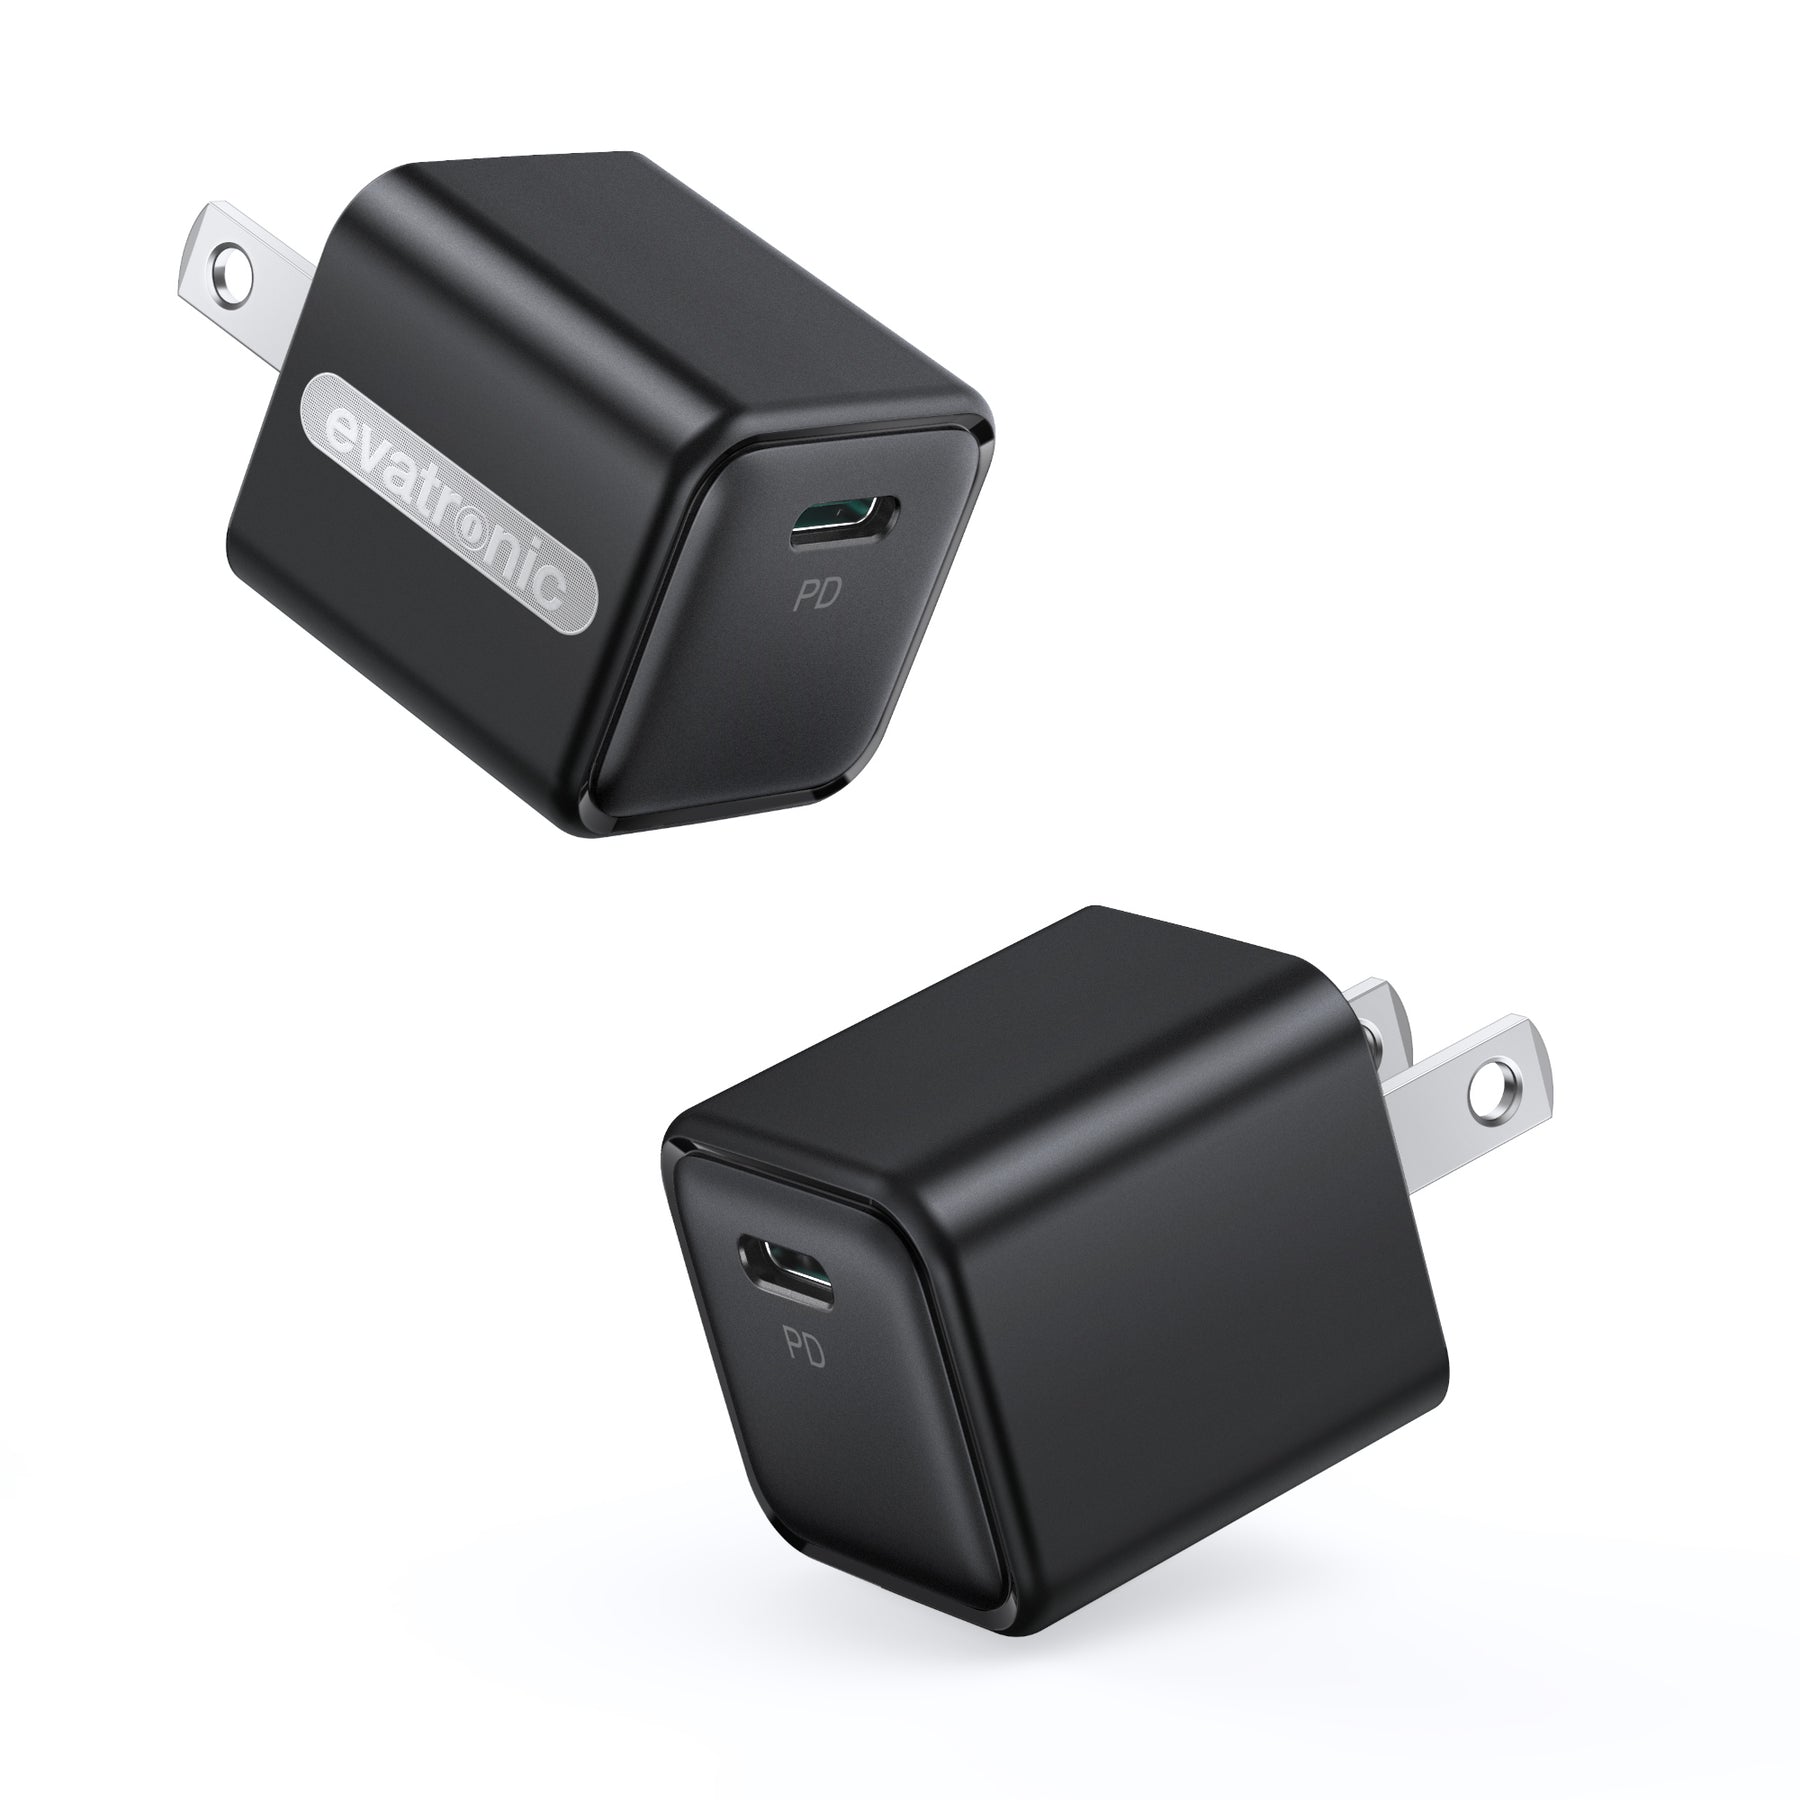 Evatronic 2-Pack 20W USB C Power Delivery Wall Charger PC025